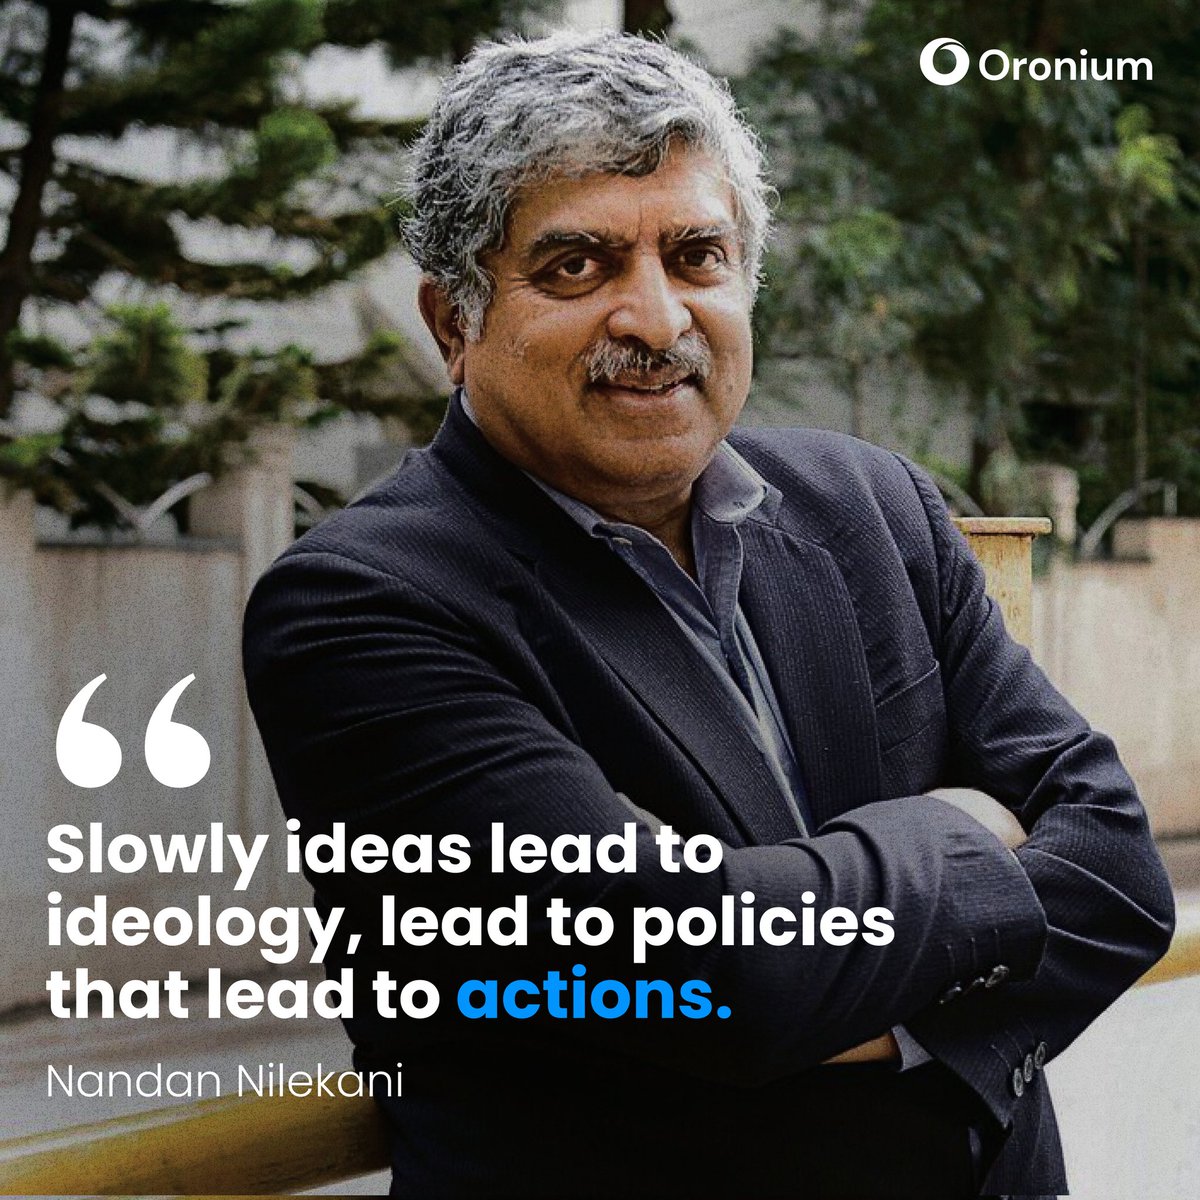 Turn your ideas into actions with Oronium.

🙌 Celebrating the visionary Nandan Nilekani, co-founder of Infosys and architect of India's Aadhaar system, for his pioneering contributions to technology and governance! 🚀 #NandanNilekani #TechInnovator #AadhaarRevolution #UPI